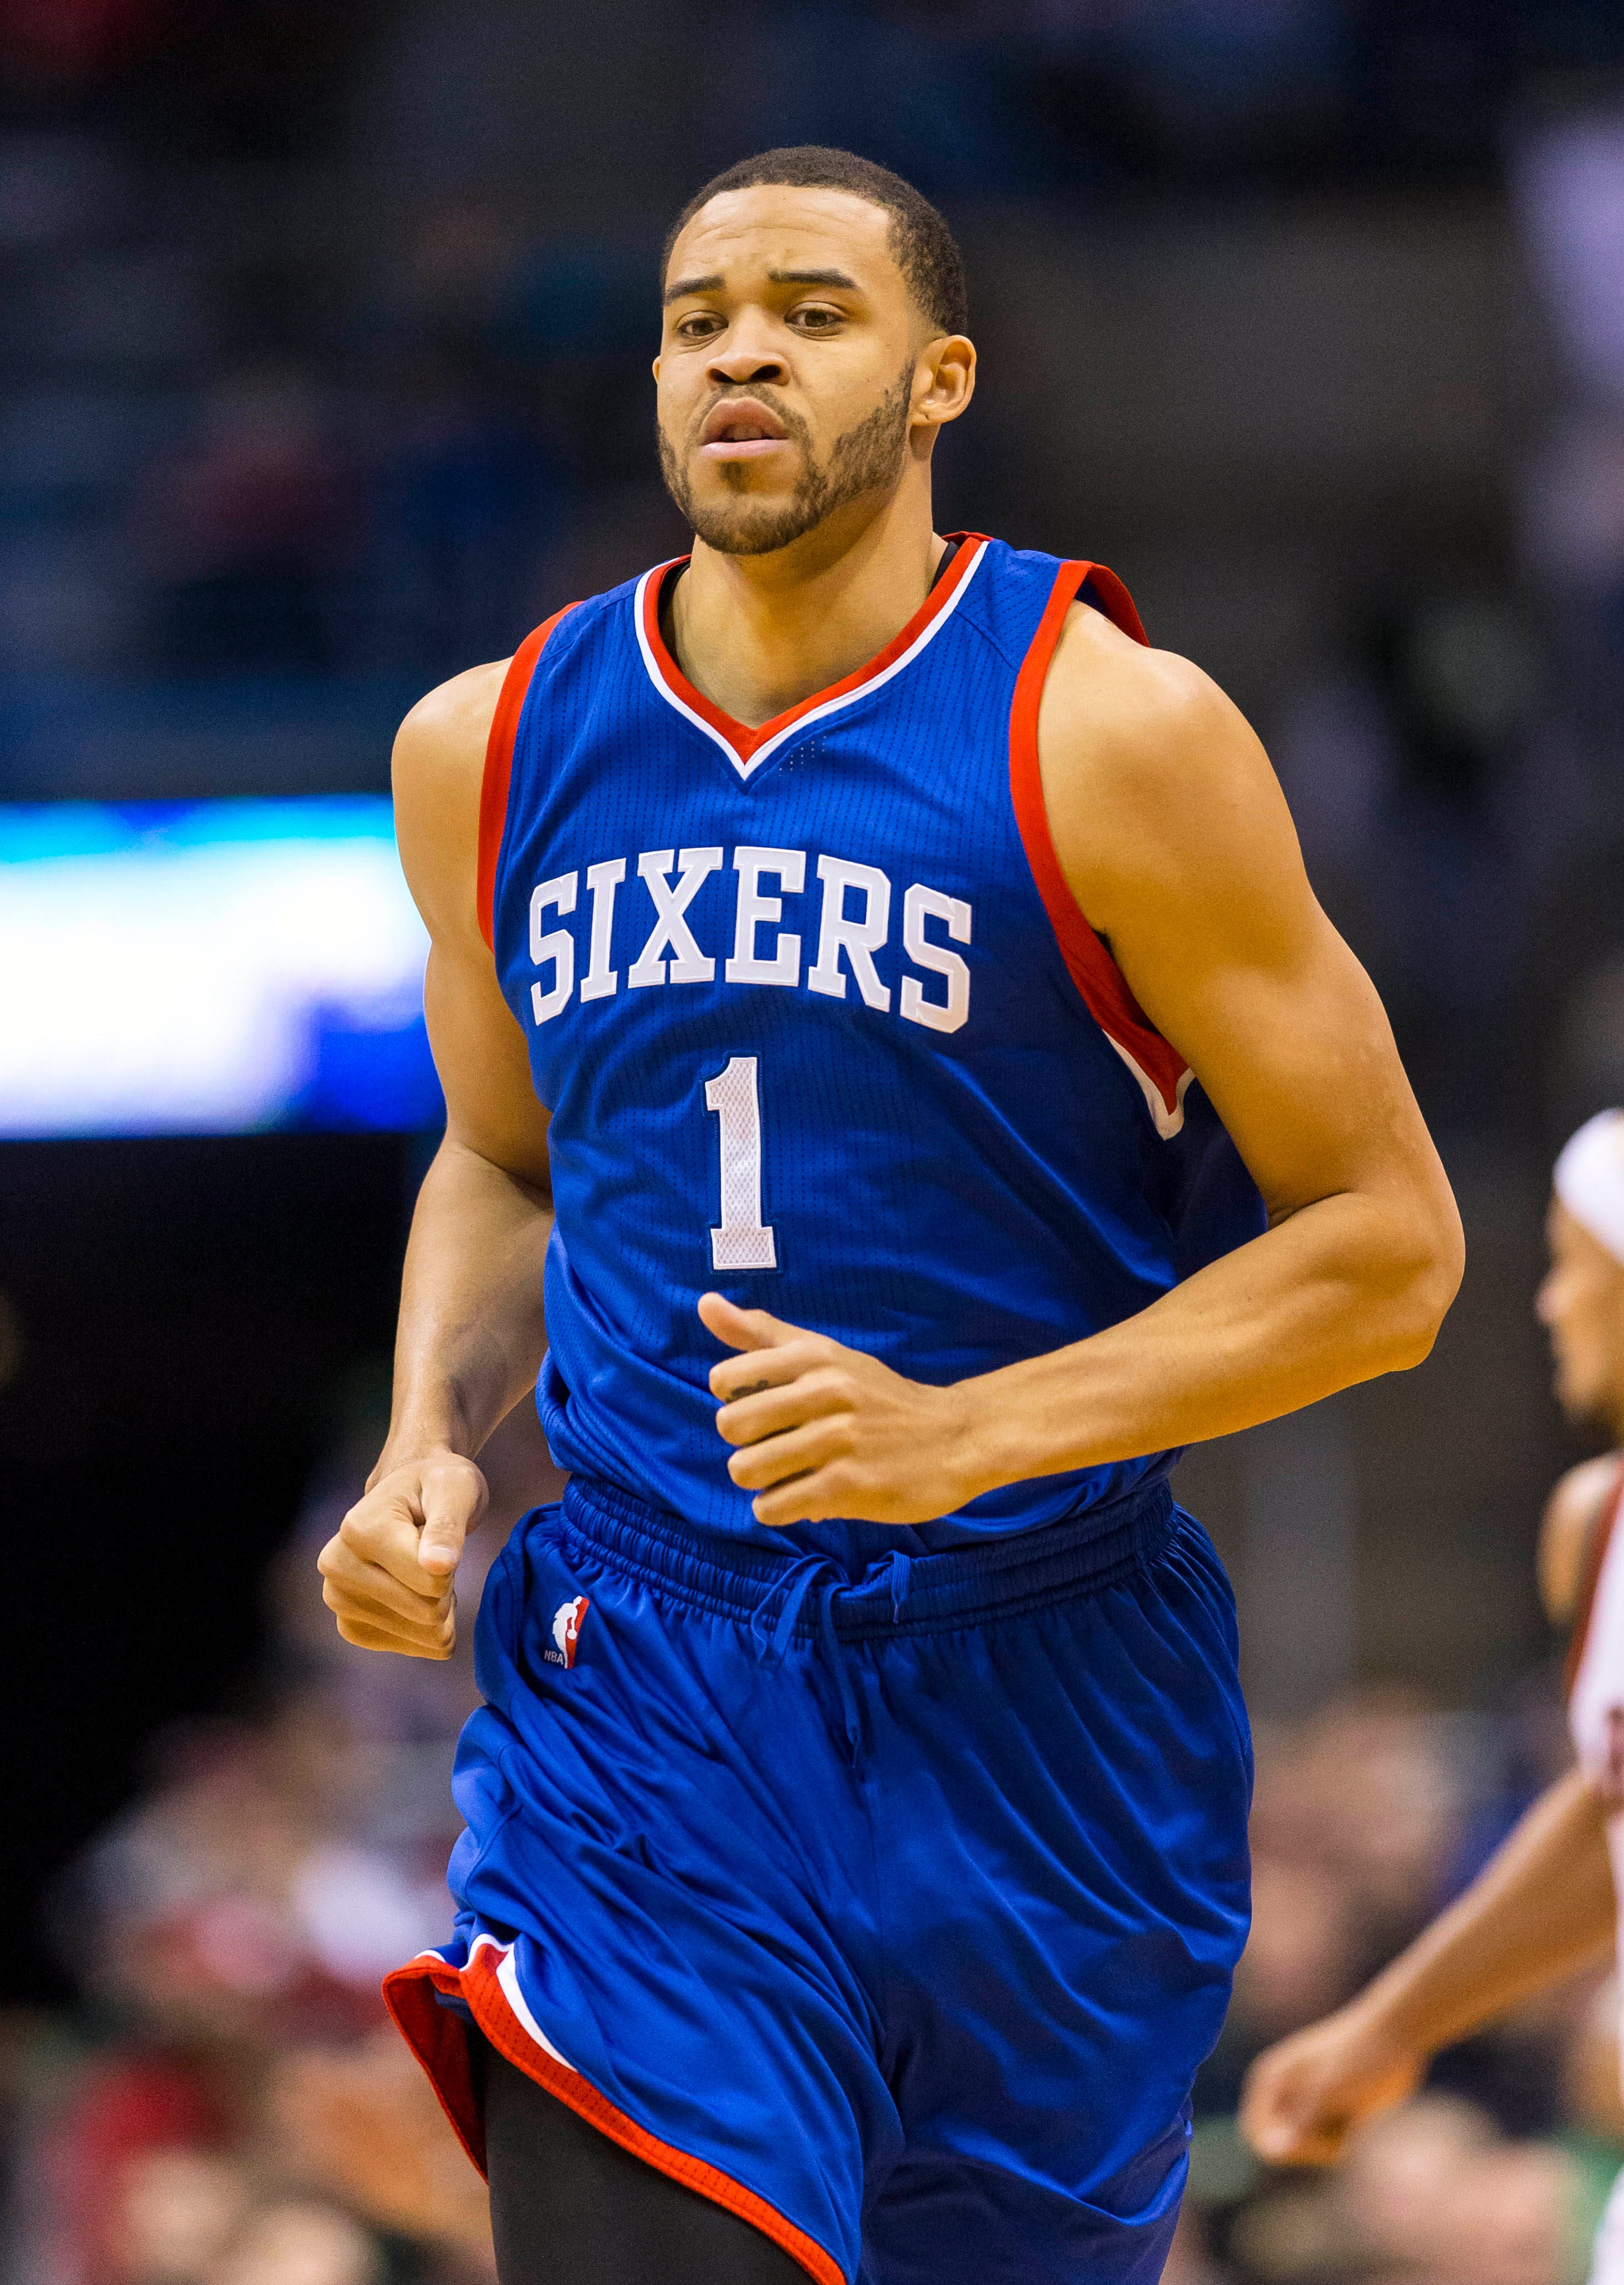 JaVale McGee waived by 76ers, can sign 